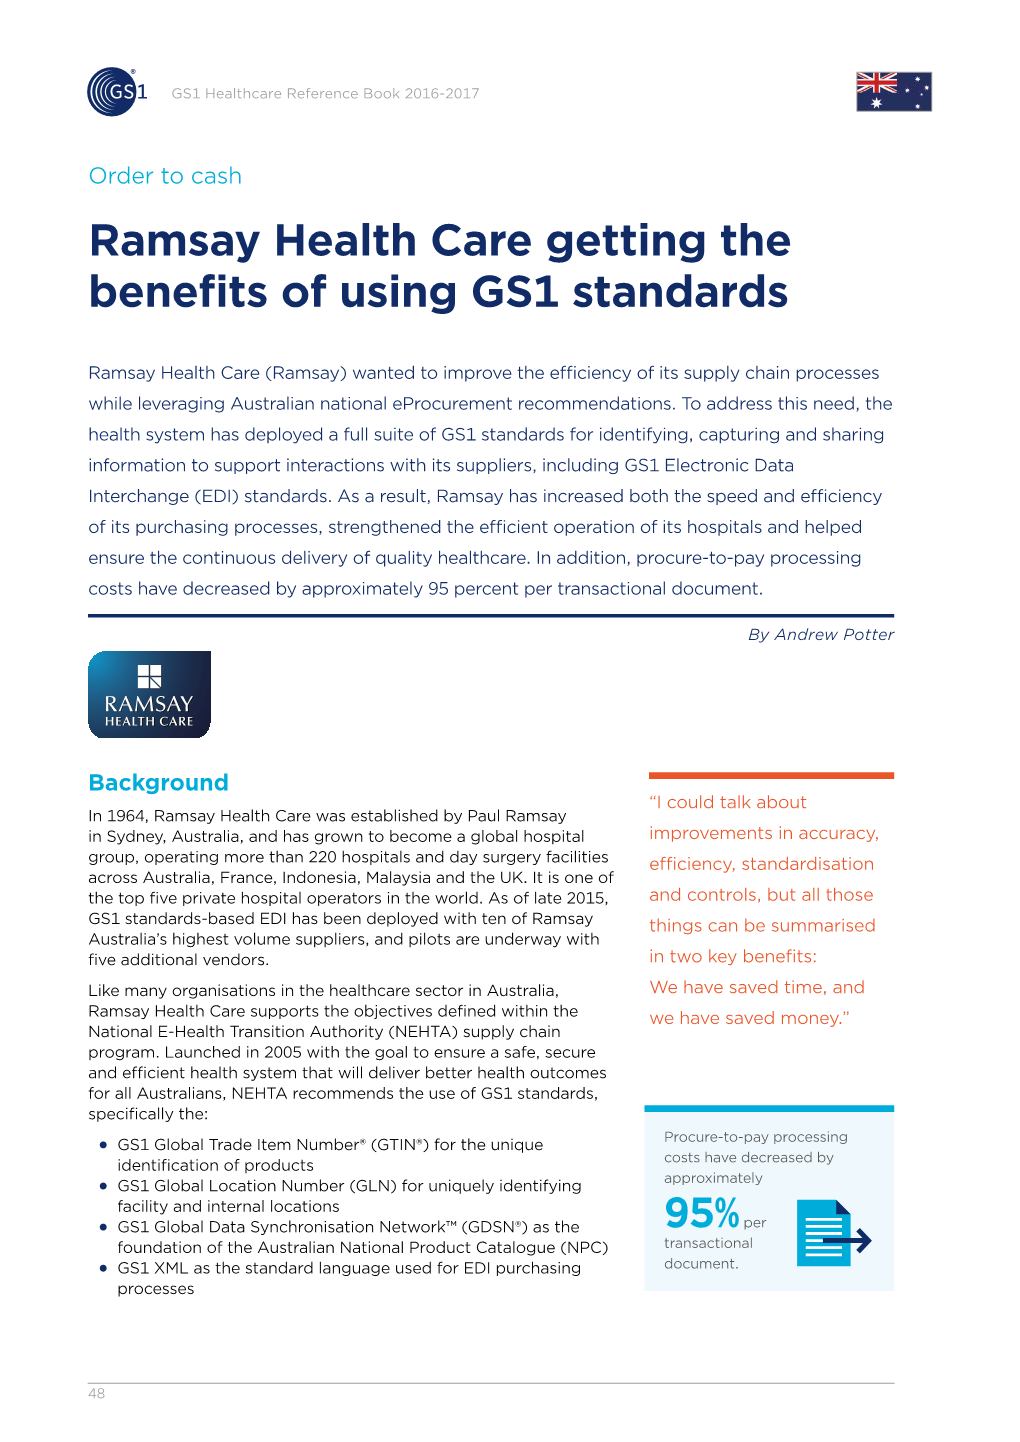 Ramsay Health Care Getting the Benefits of Using GS1 Standards